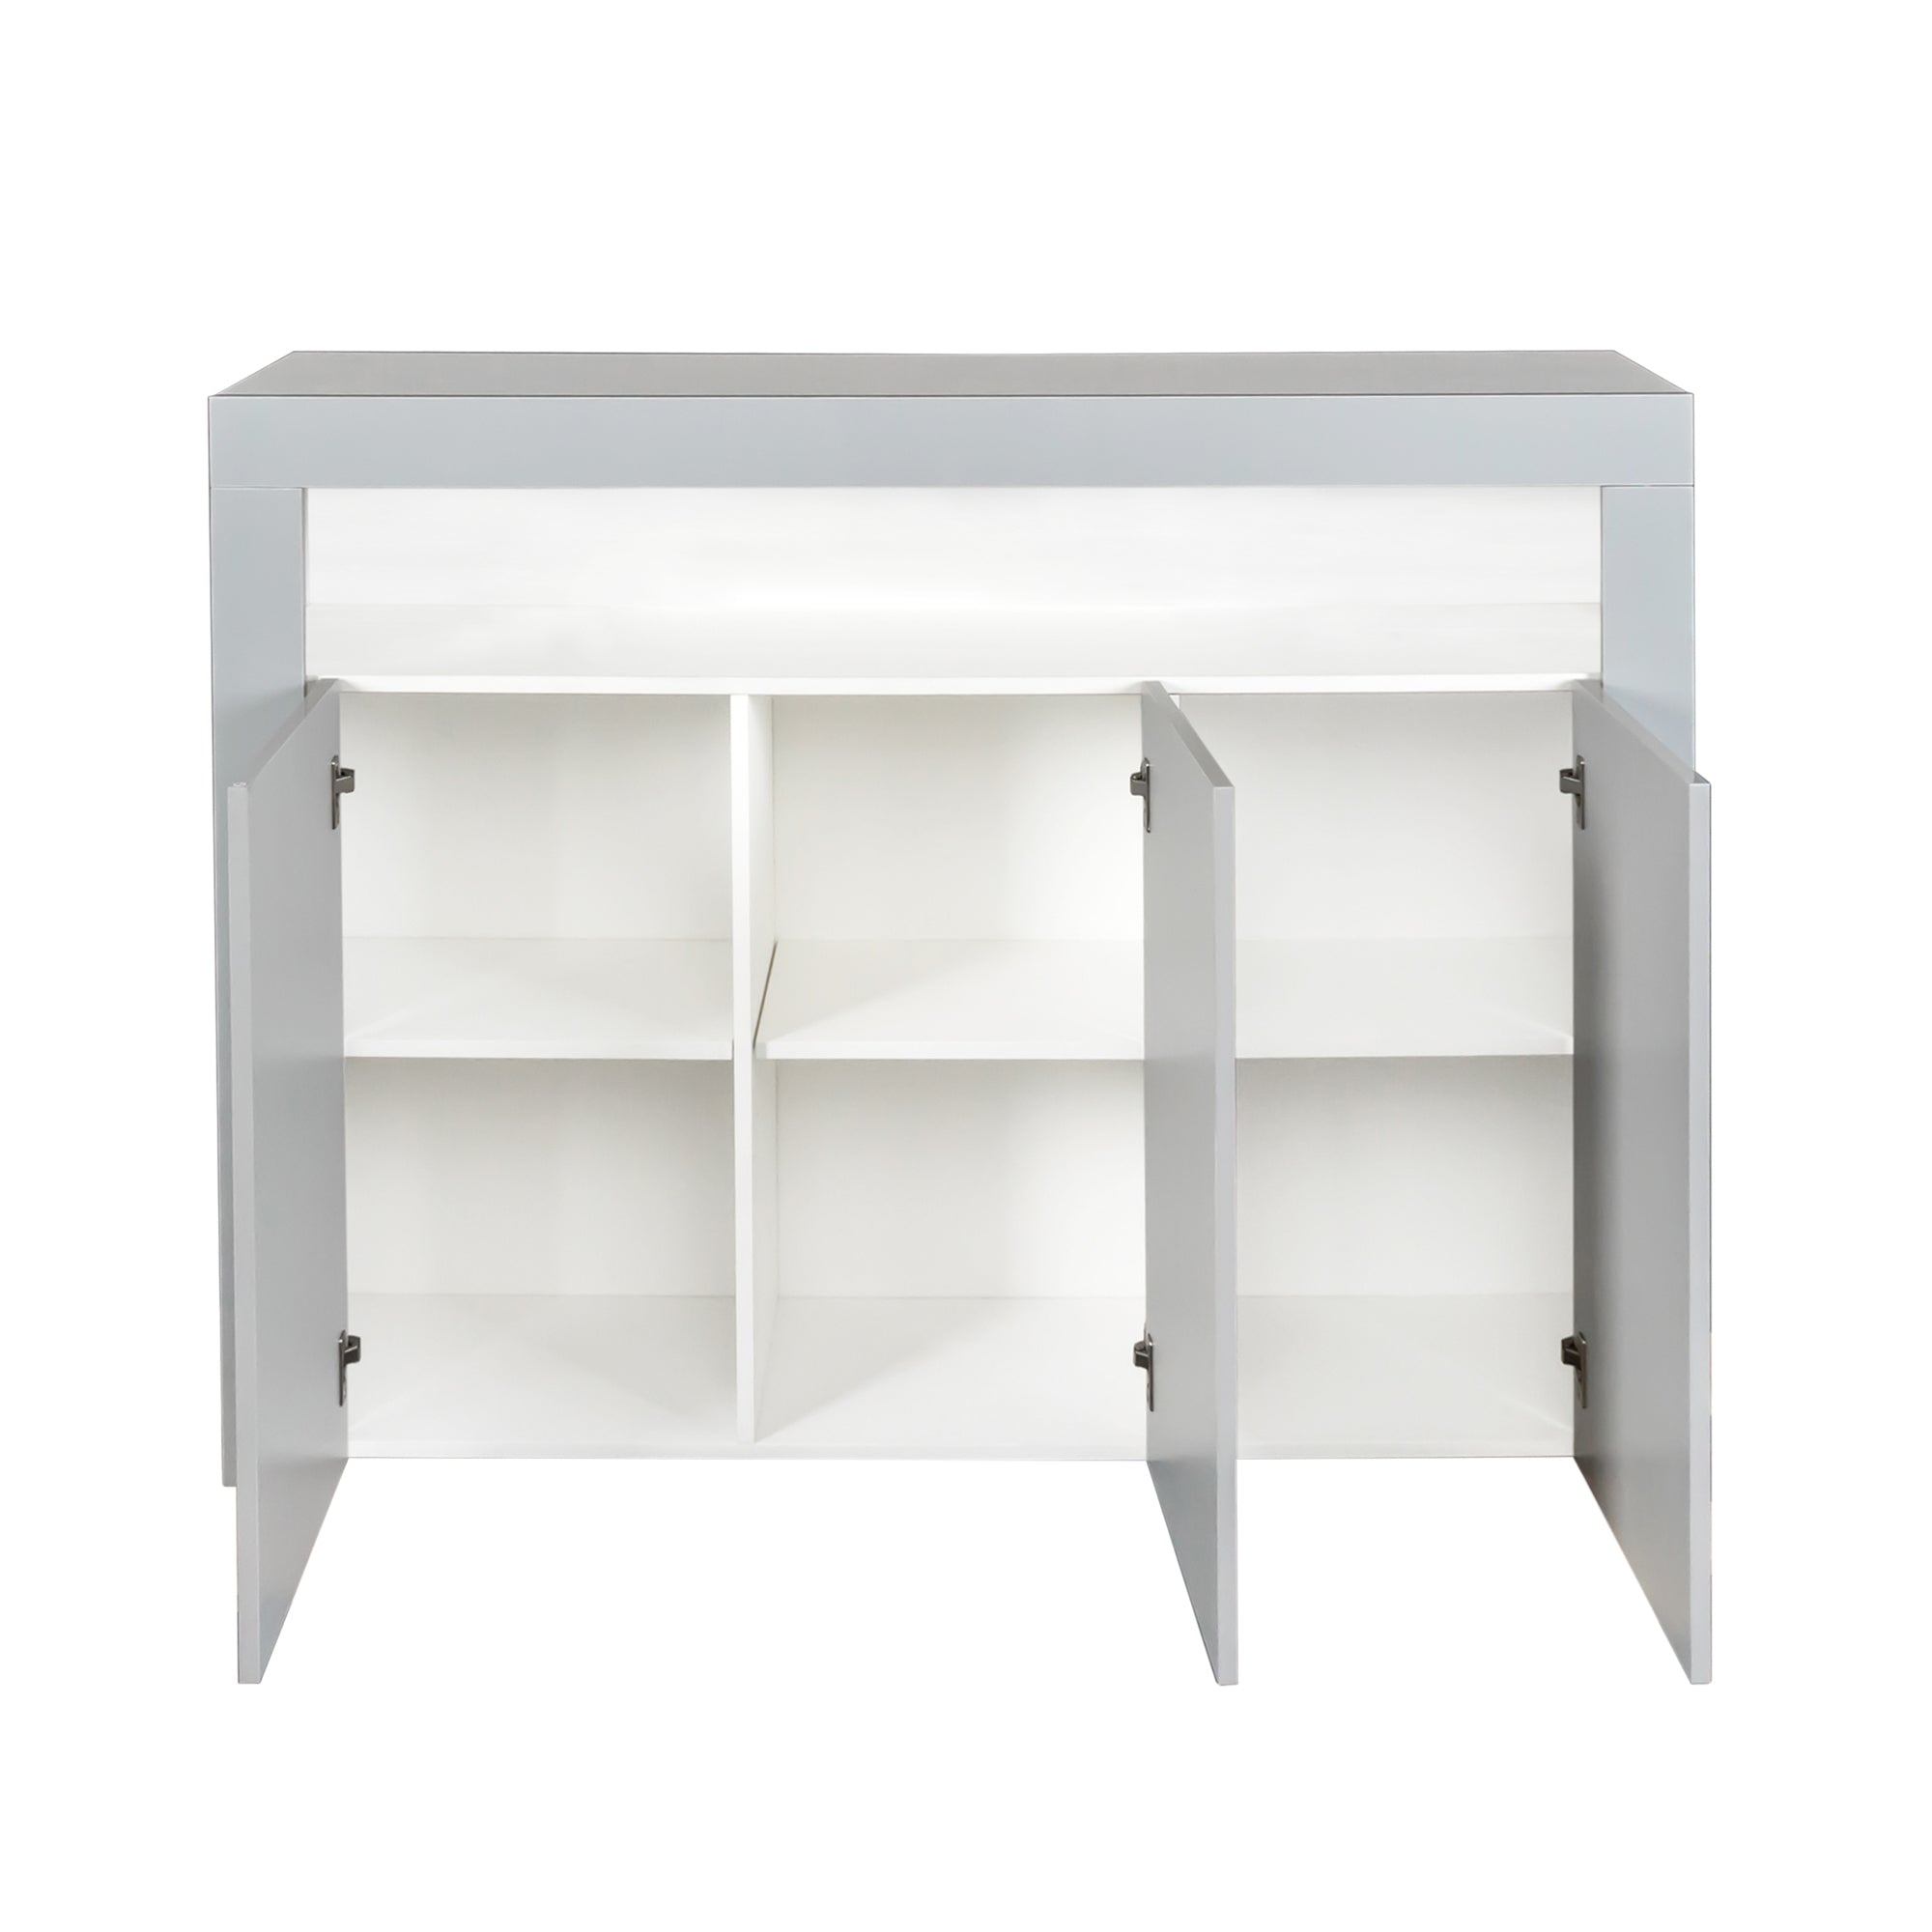 Living Room Sideboard Storage Cabinet Black High Gloss white+gray-mdf